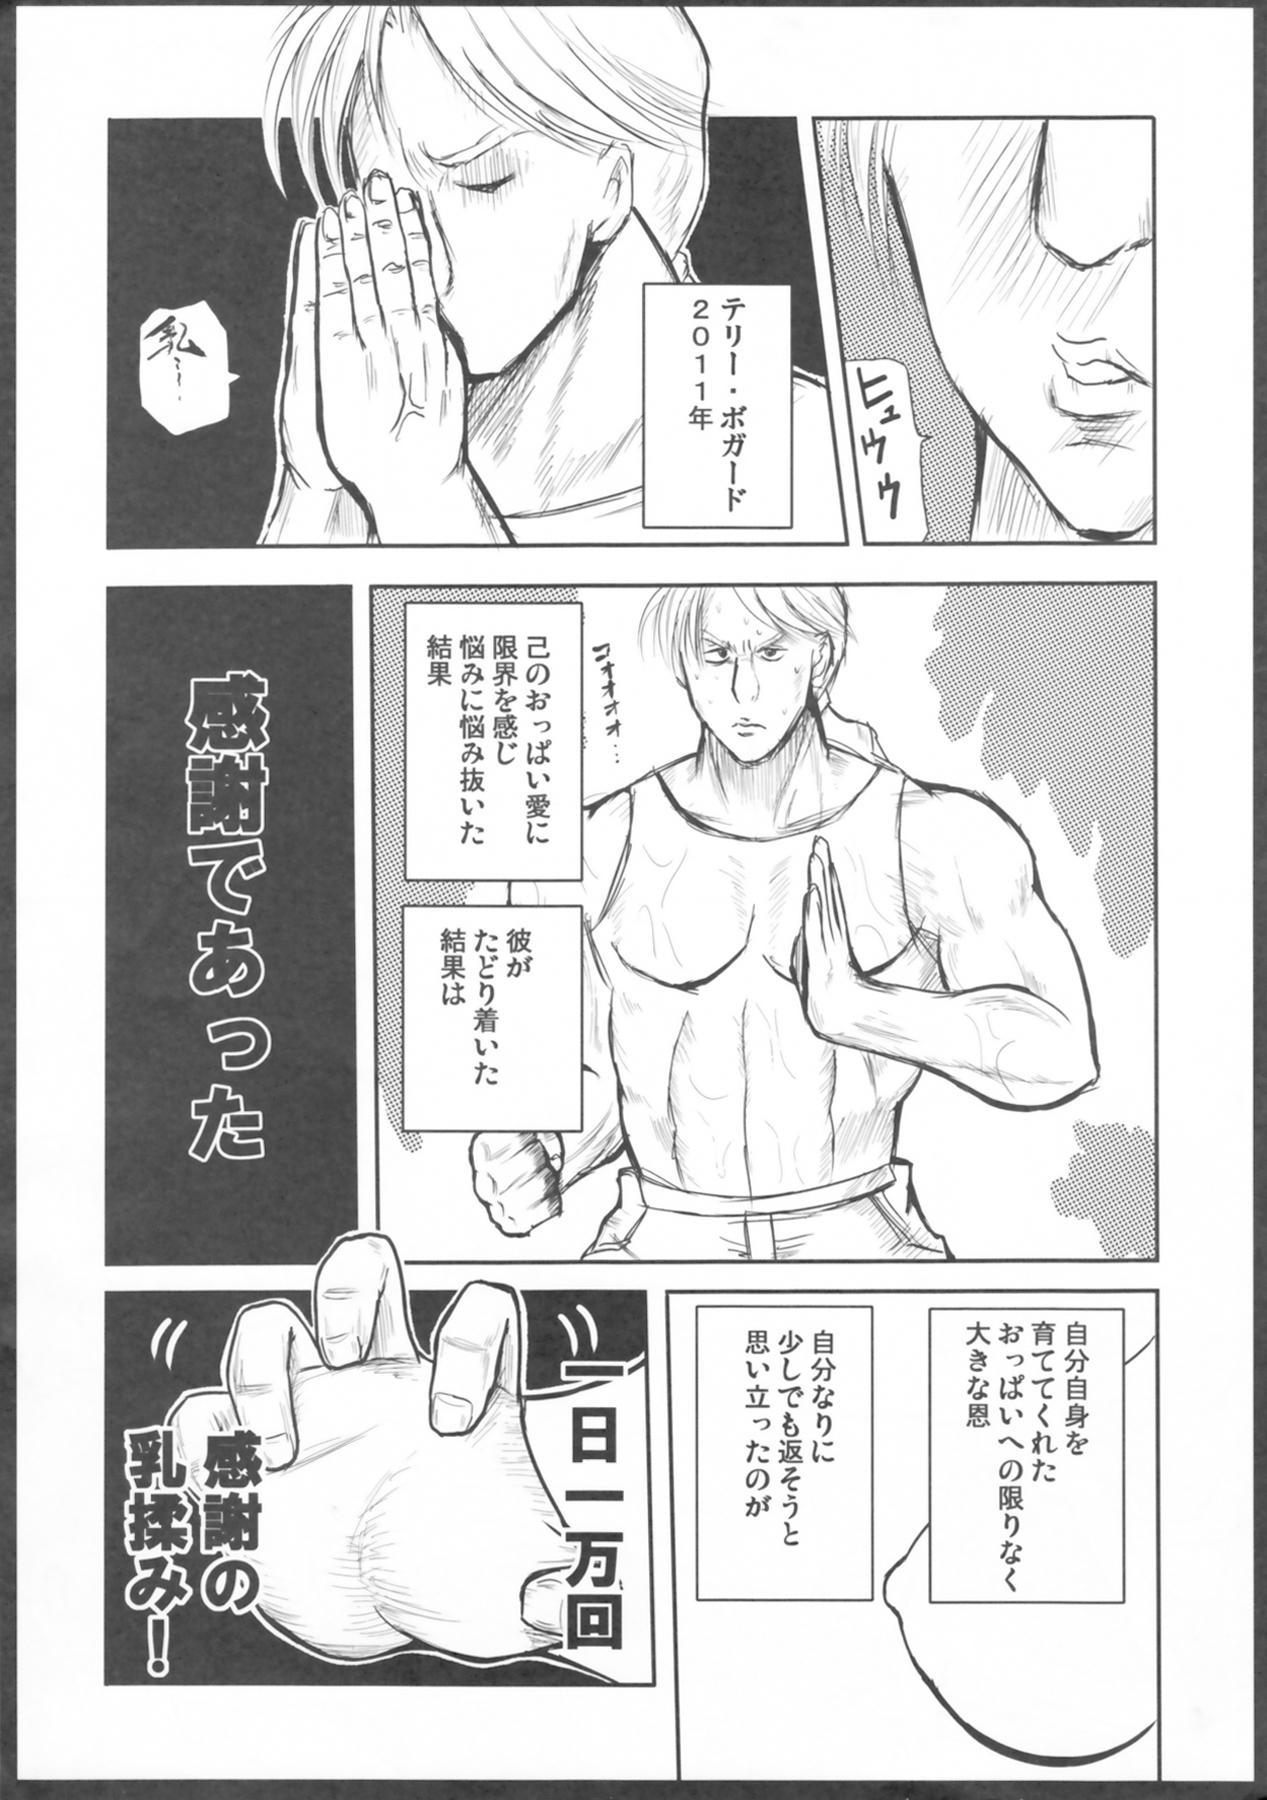 Para Milk Triple Ecstasy - King of fighters Fatal fury Amateur Asian - Page 5